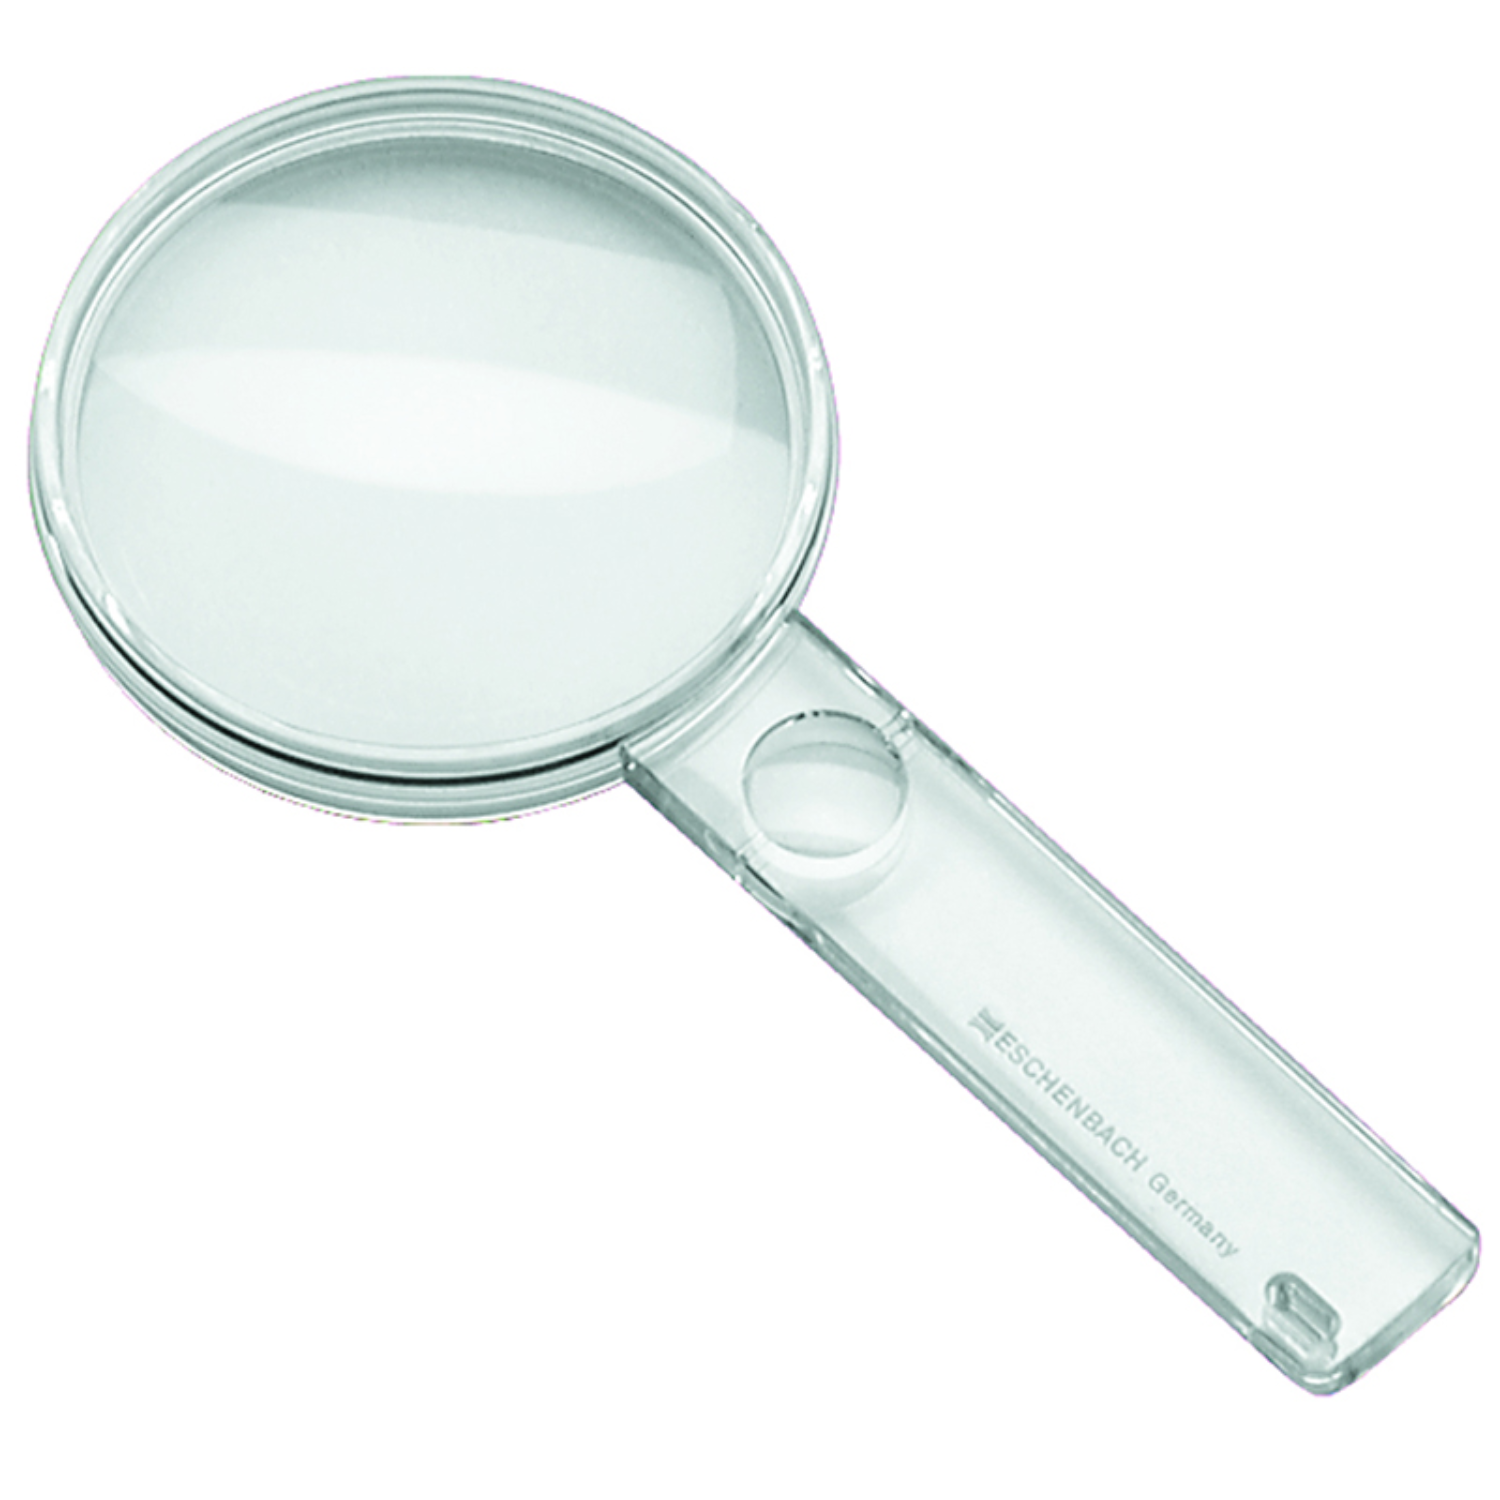 Image of 2.3x round biconvex lens hand-held magnifier from Eschenbach Optik